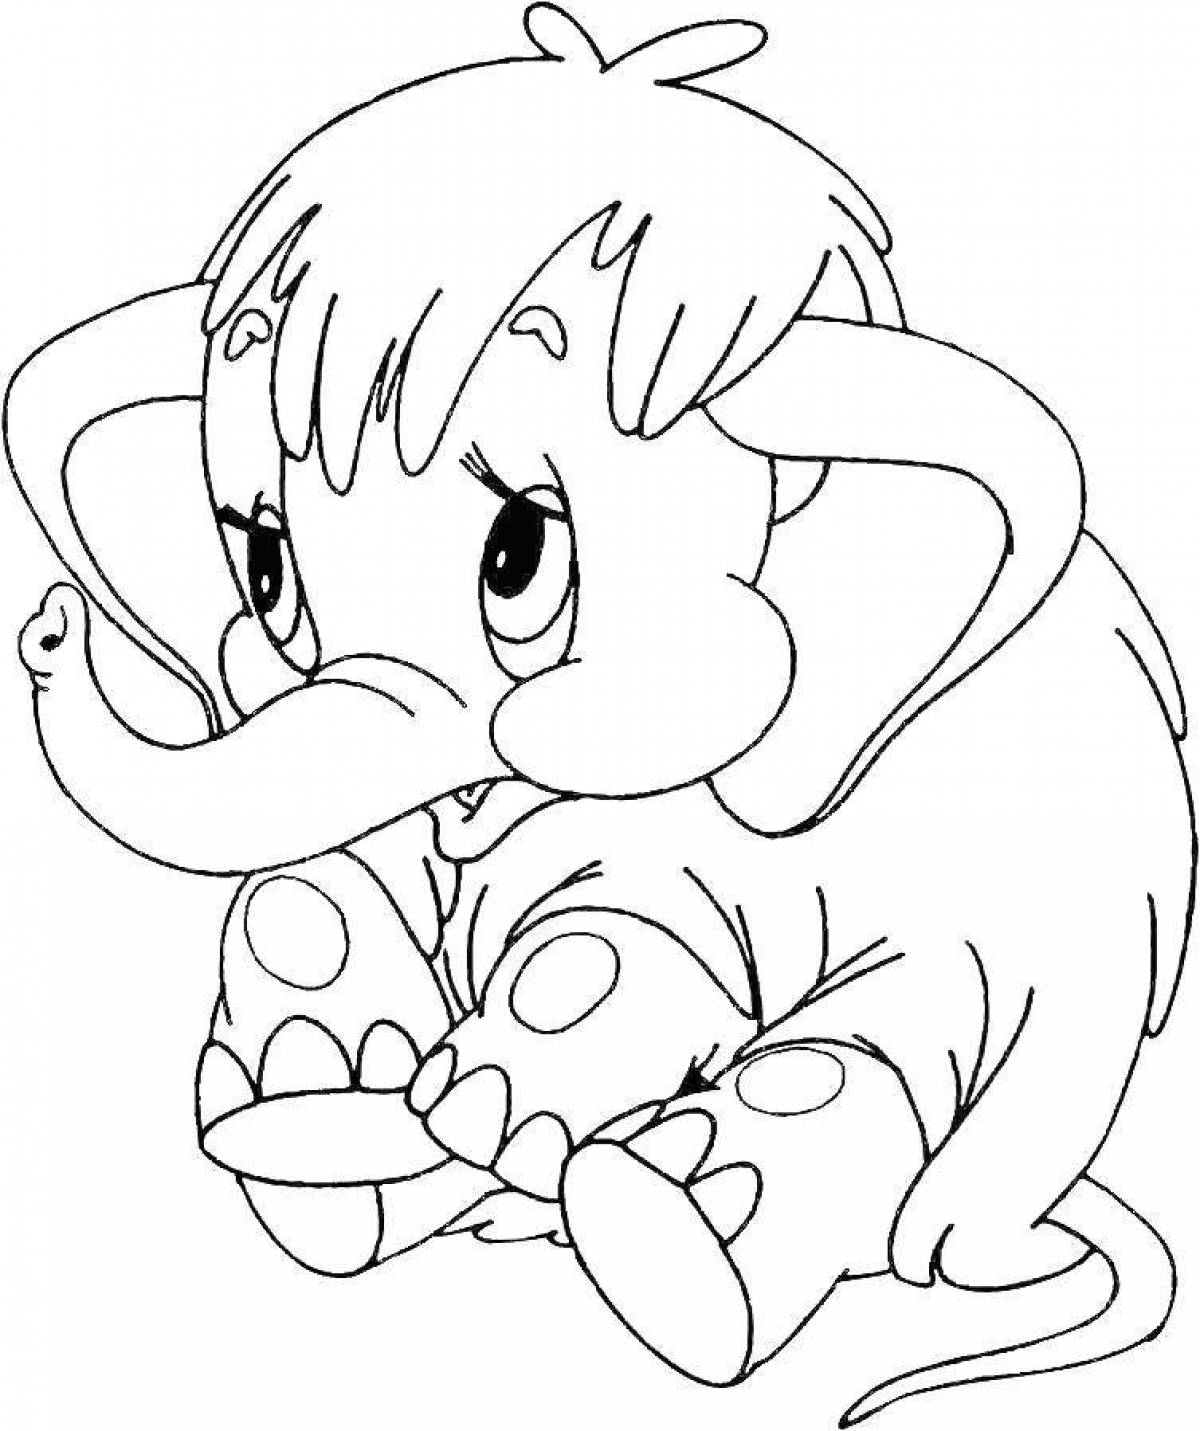 Charming coloring draw coloring pages